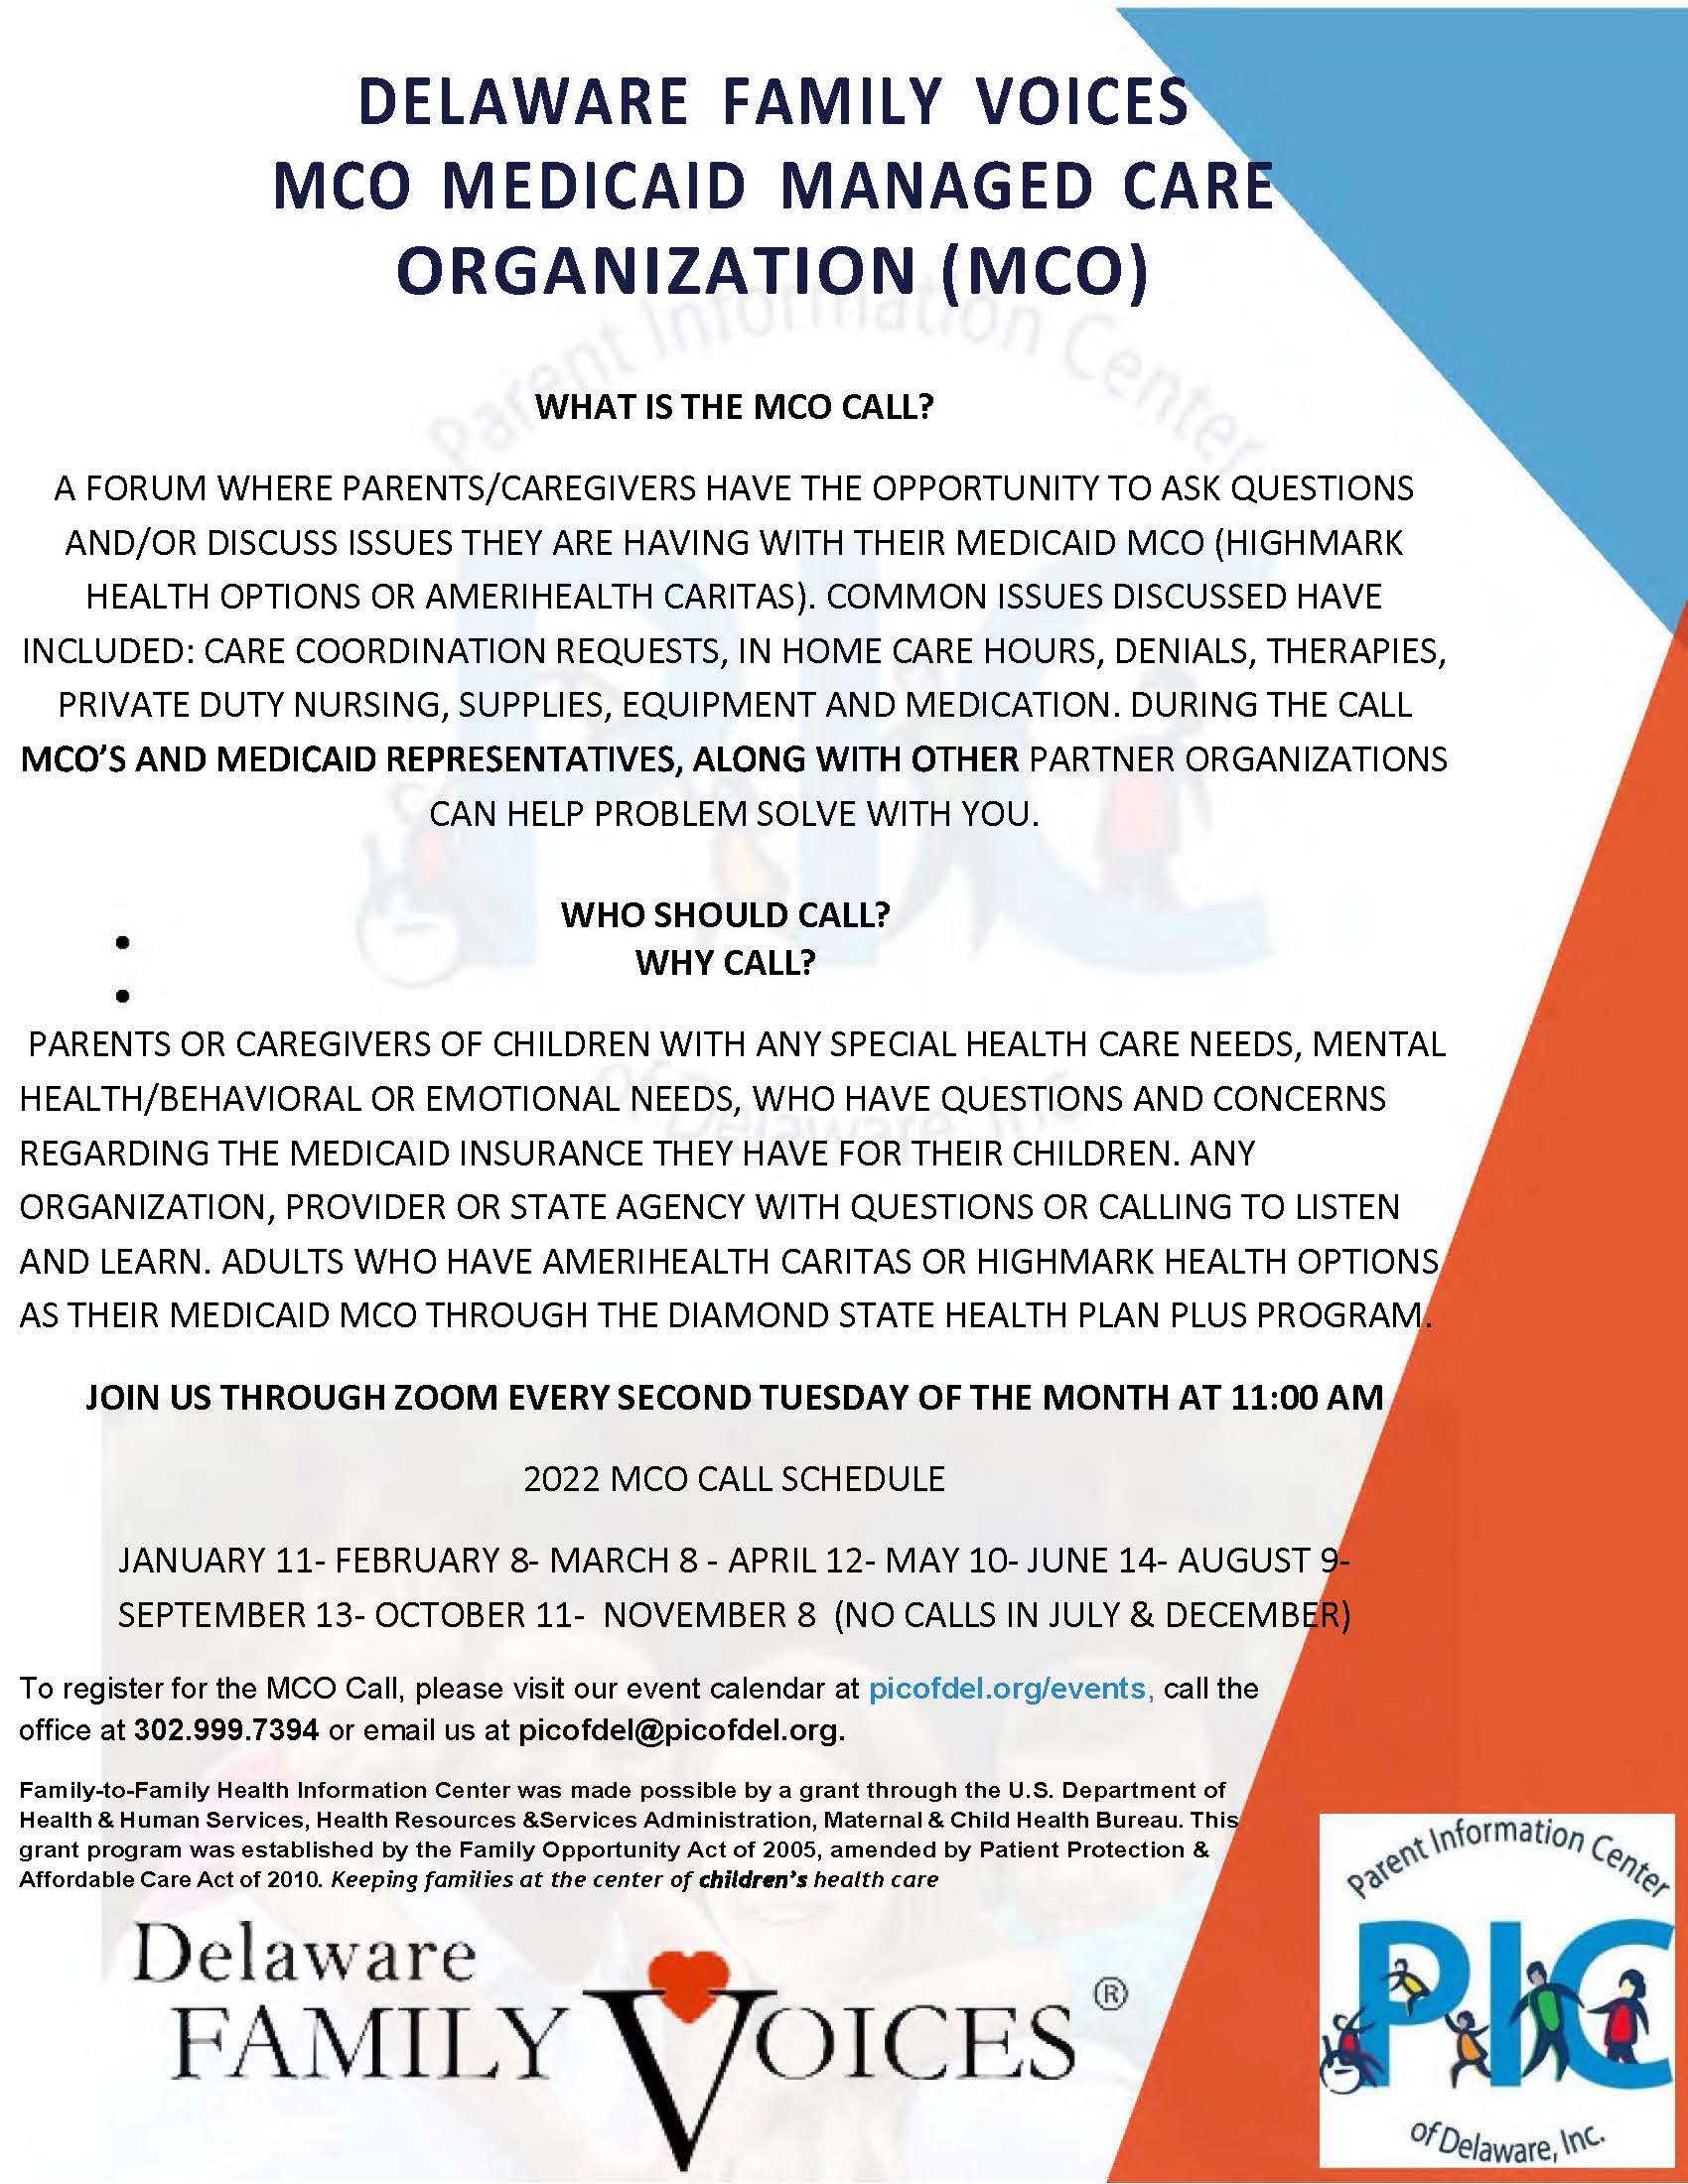 Managed Care Organization (MCO) Call- Now available in Spanish